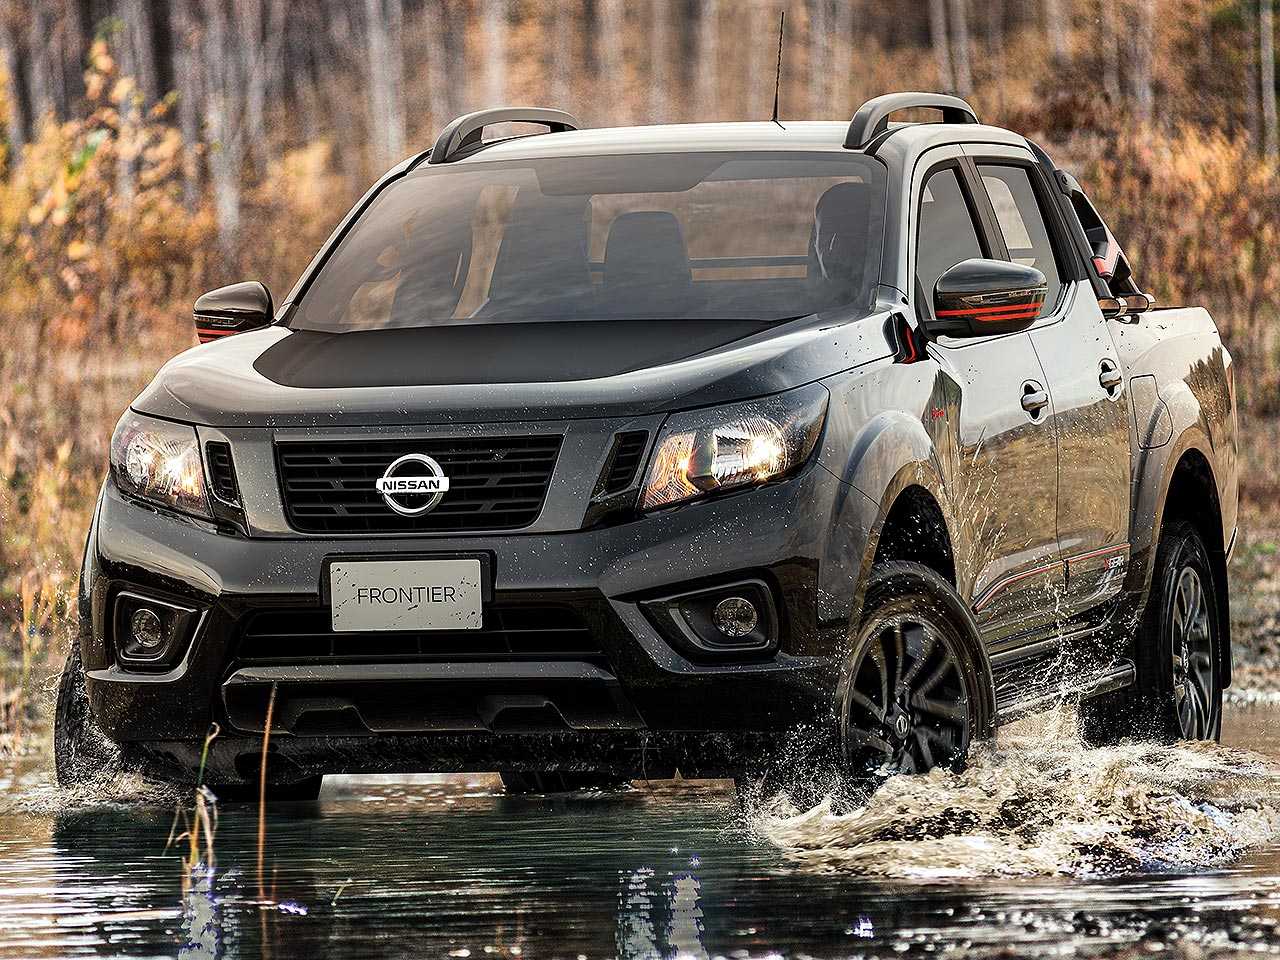 NissanFrontier 2022 - ngulo frontal